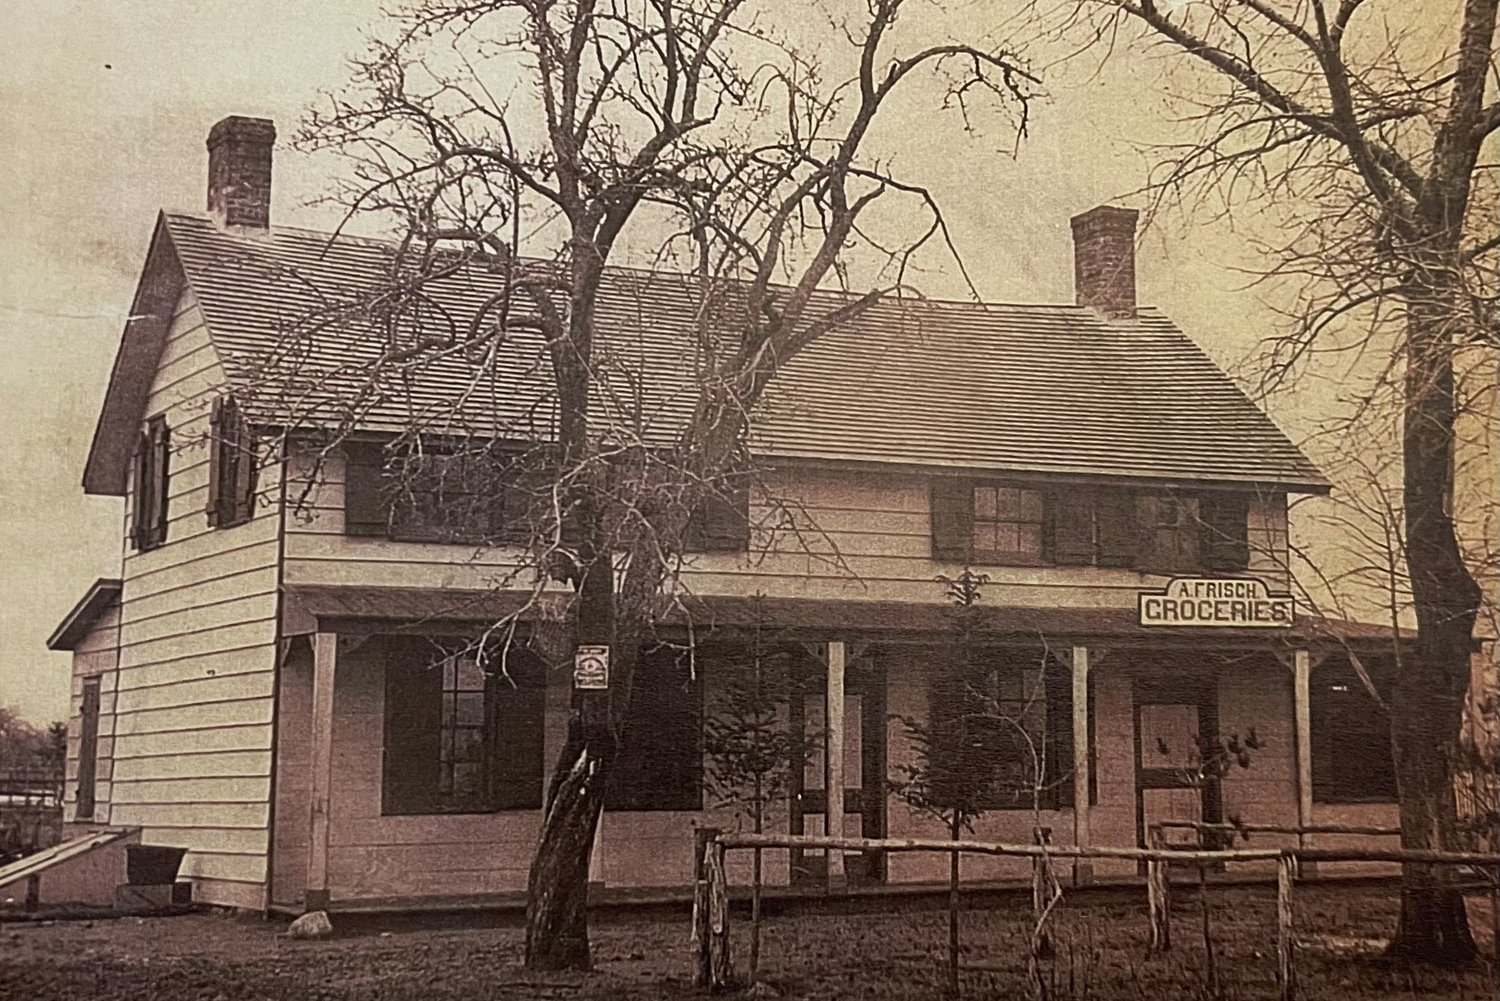 Members of the Frisch family were original settlers of Bellmore, when it was known as Smithville South. They owned a lot of property and operated several storefronts, including a general store, seen above, on what is now Bellmore Avenue.